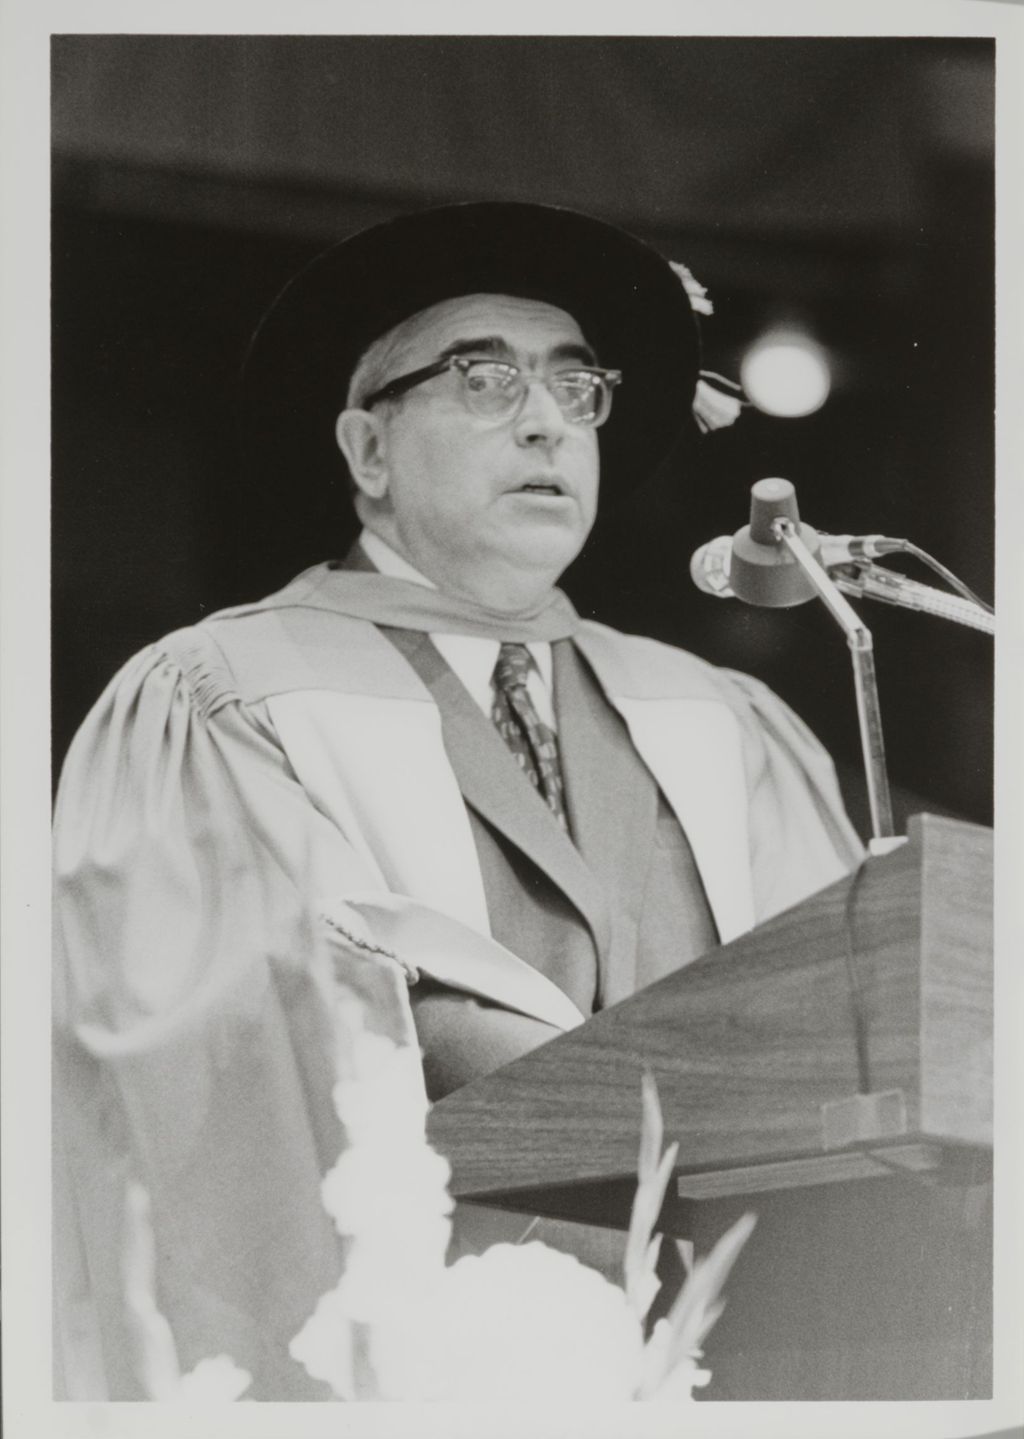 Miniature of Faculty member at the podium during the graduation ceremony